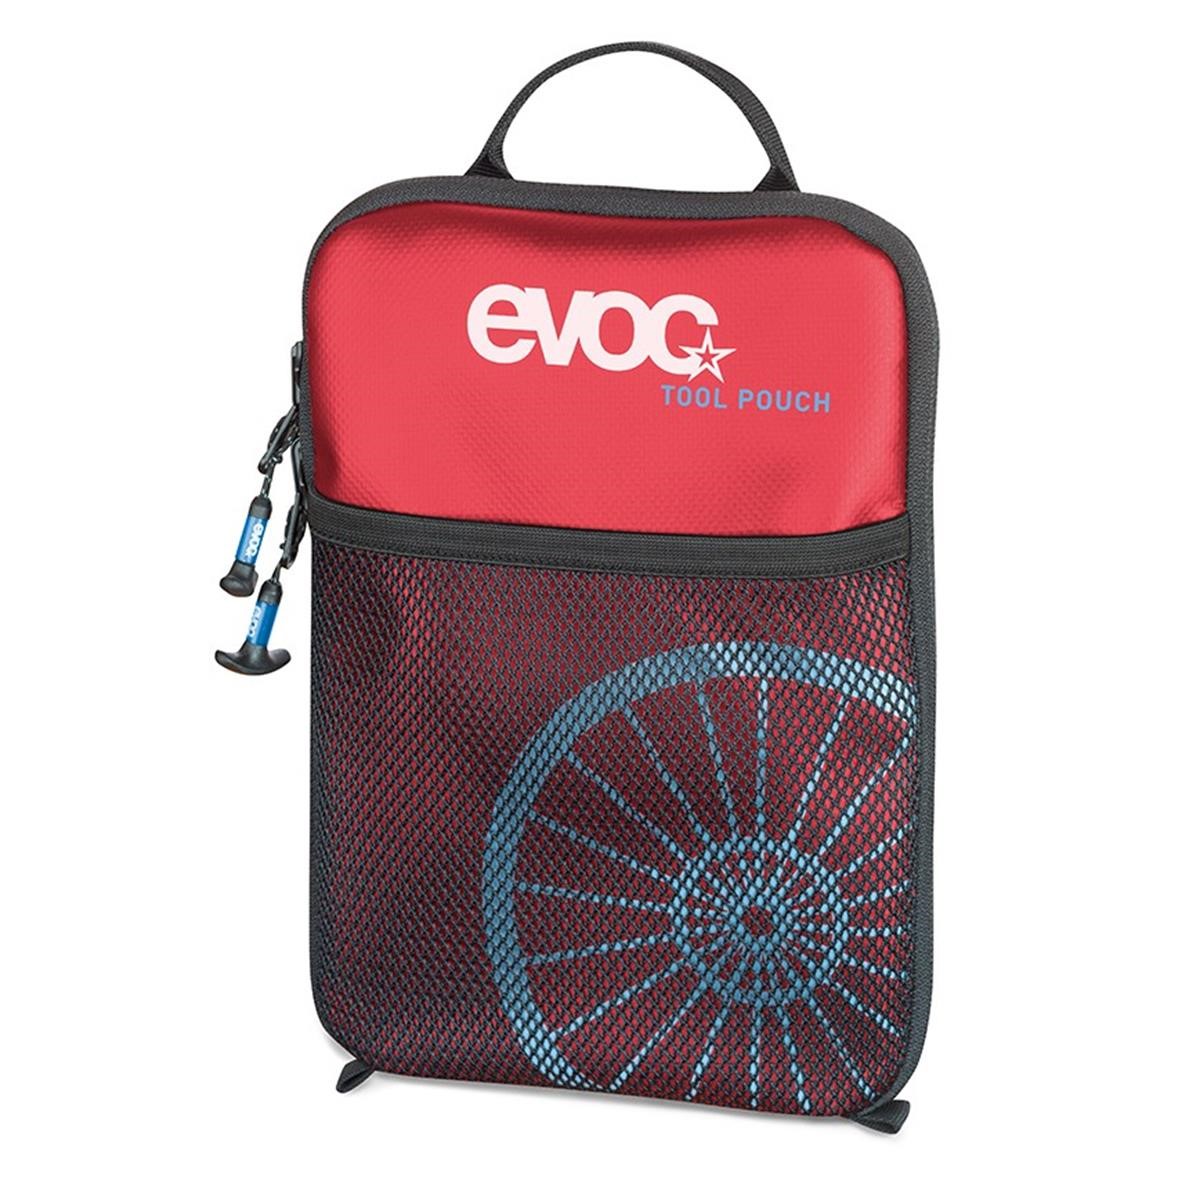 Evoc Tool Bag Tool Pouch Red - 1 Liter